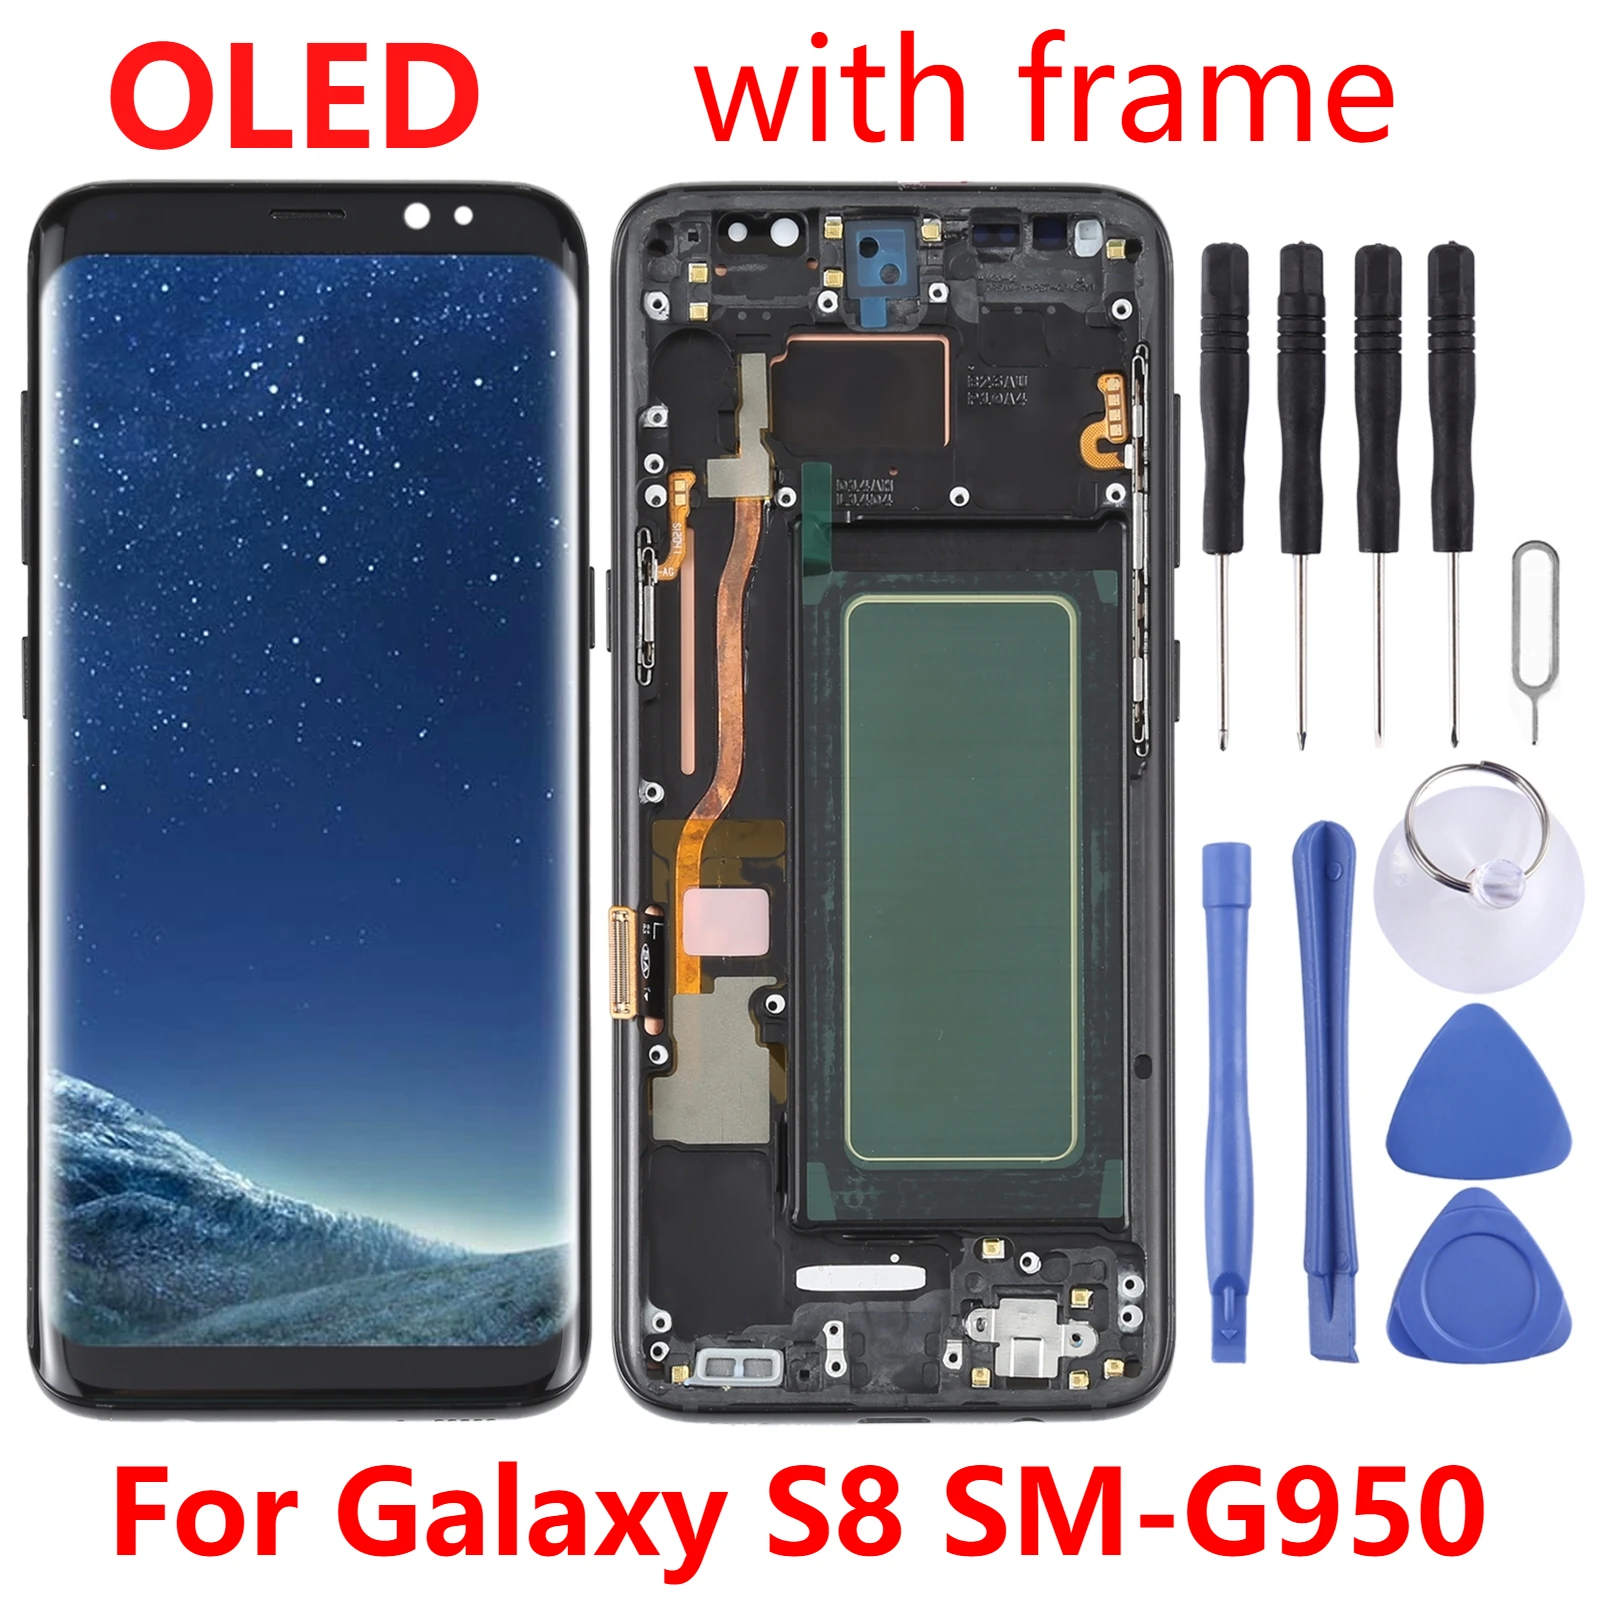 

OLED LCD Screen For Samsung Galaxy S8 SM-G950 Digitizer Full Assembly with Frame